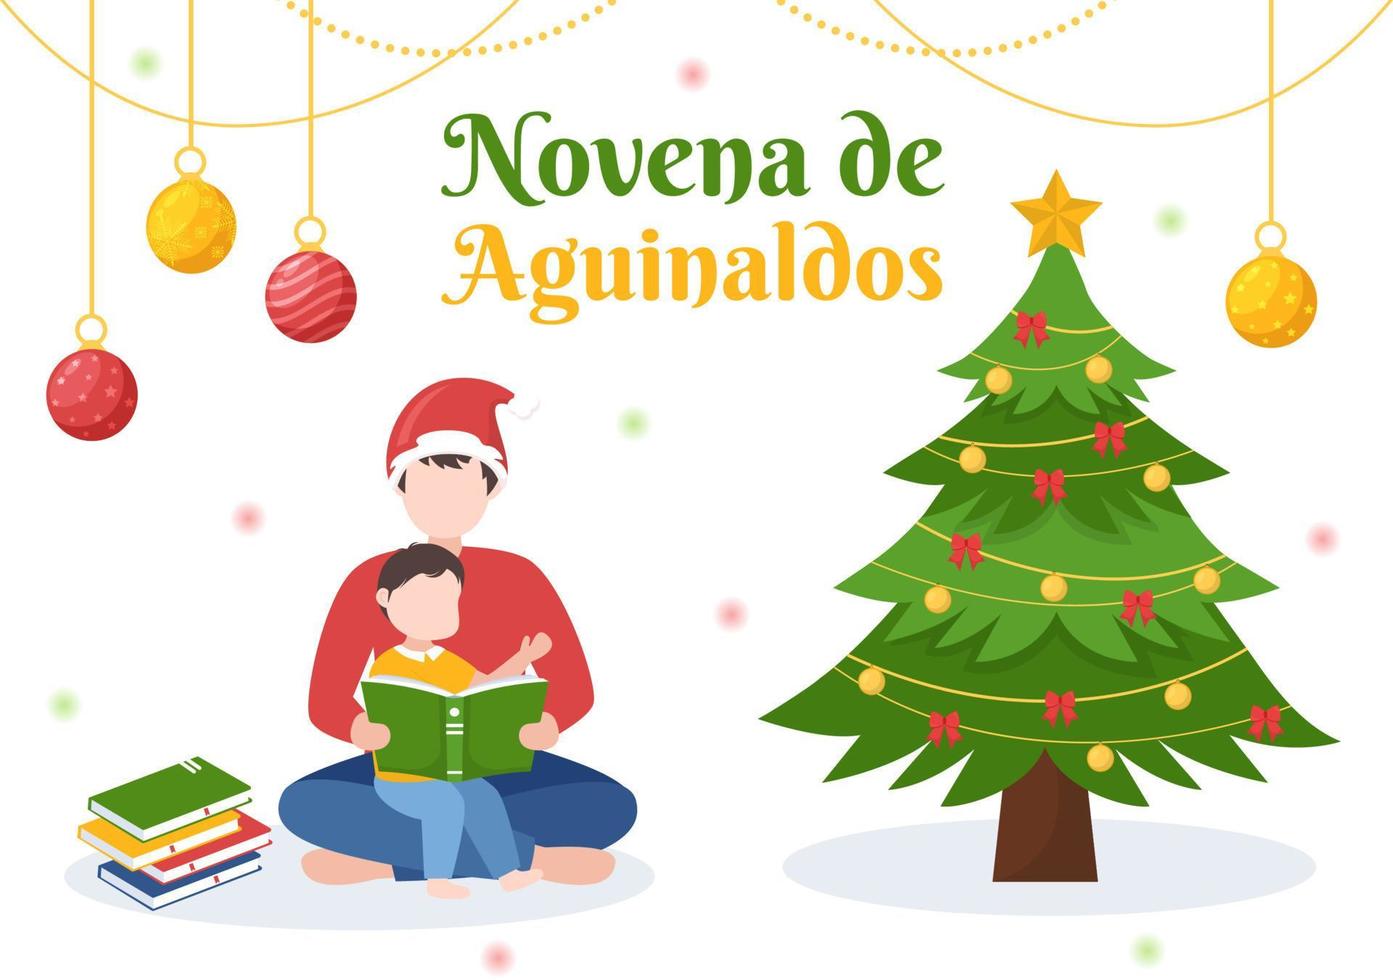 Novena De Aguinaldos Holiday Tradition in Colombia for Families to Get Together at Christmas in Flat Cartoon Hand Drawn Templates Illustration vector